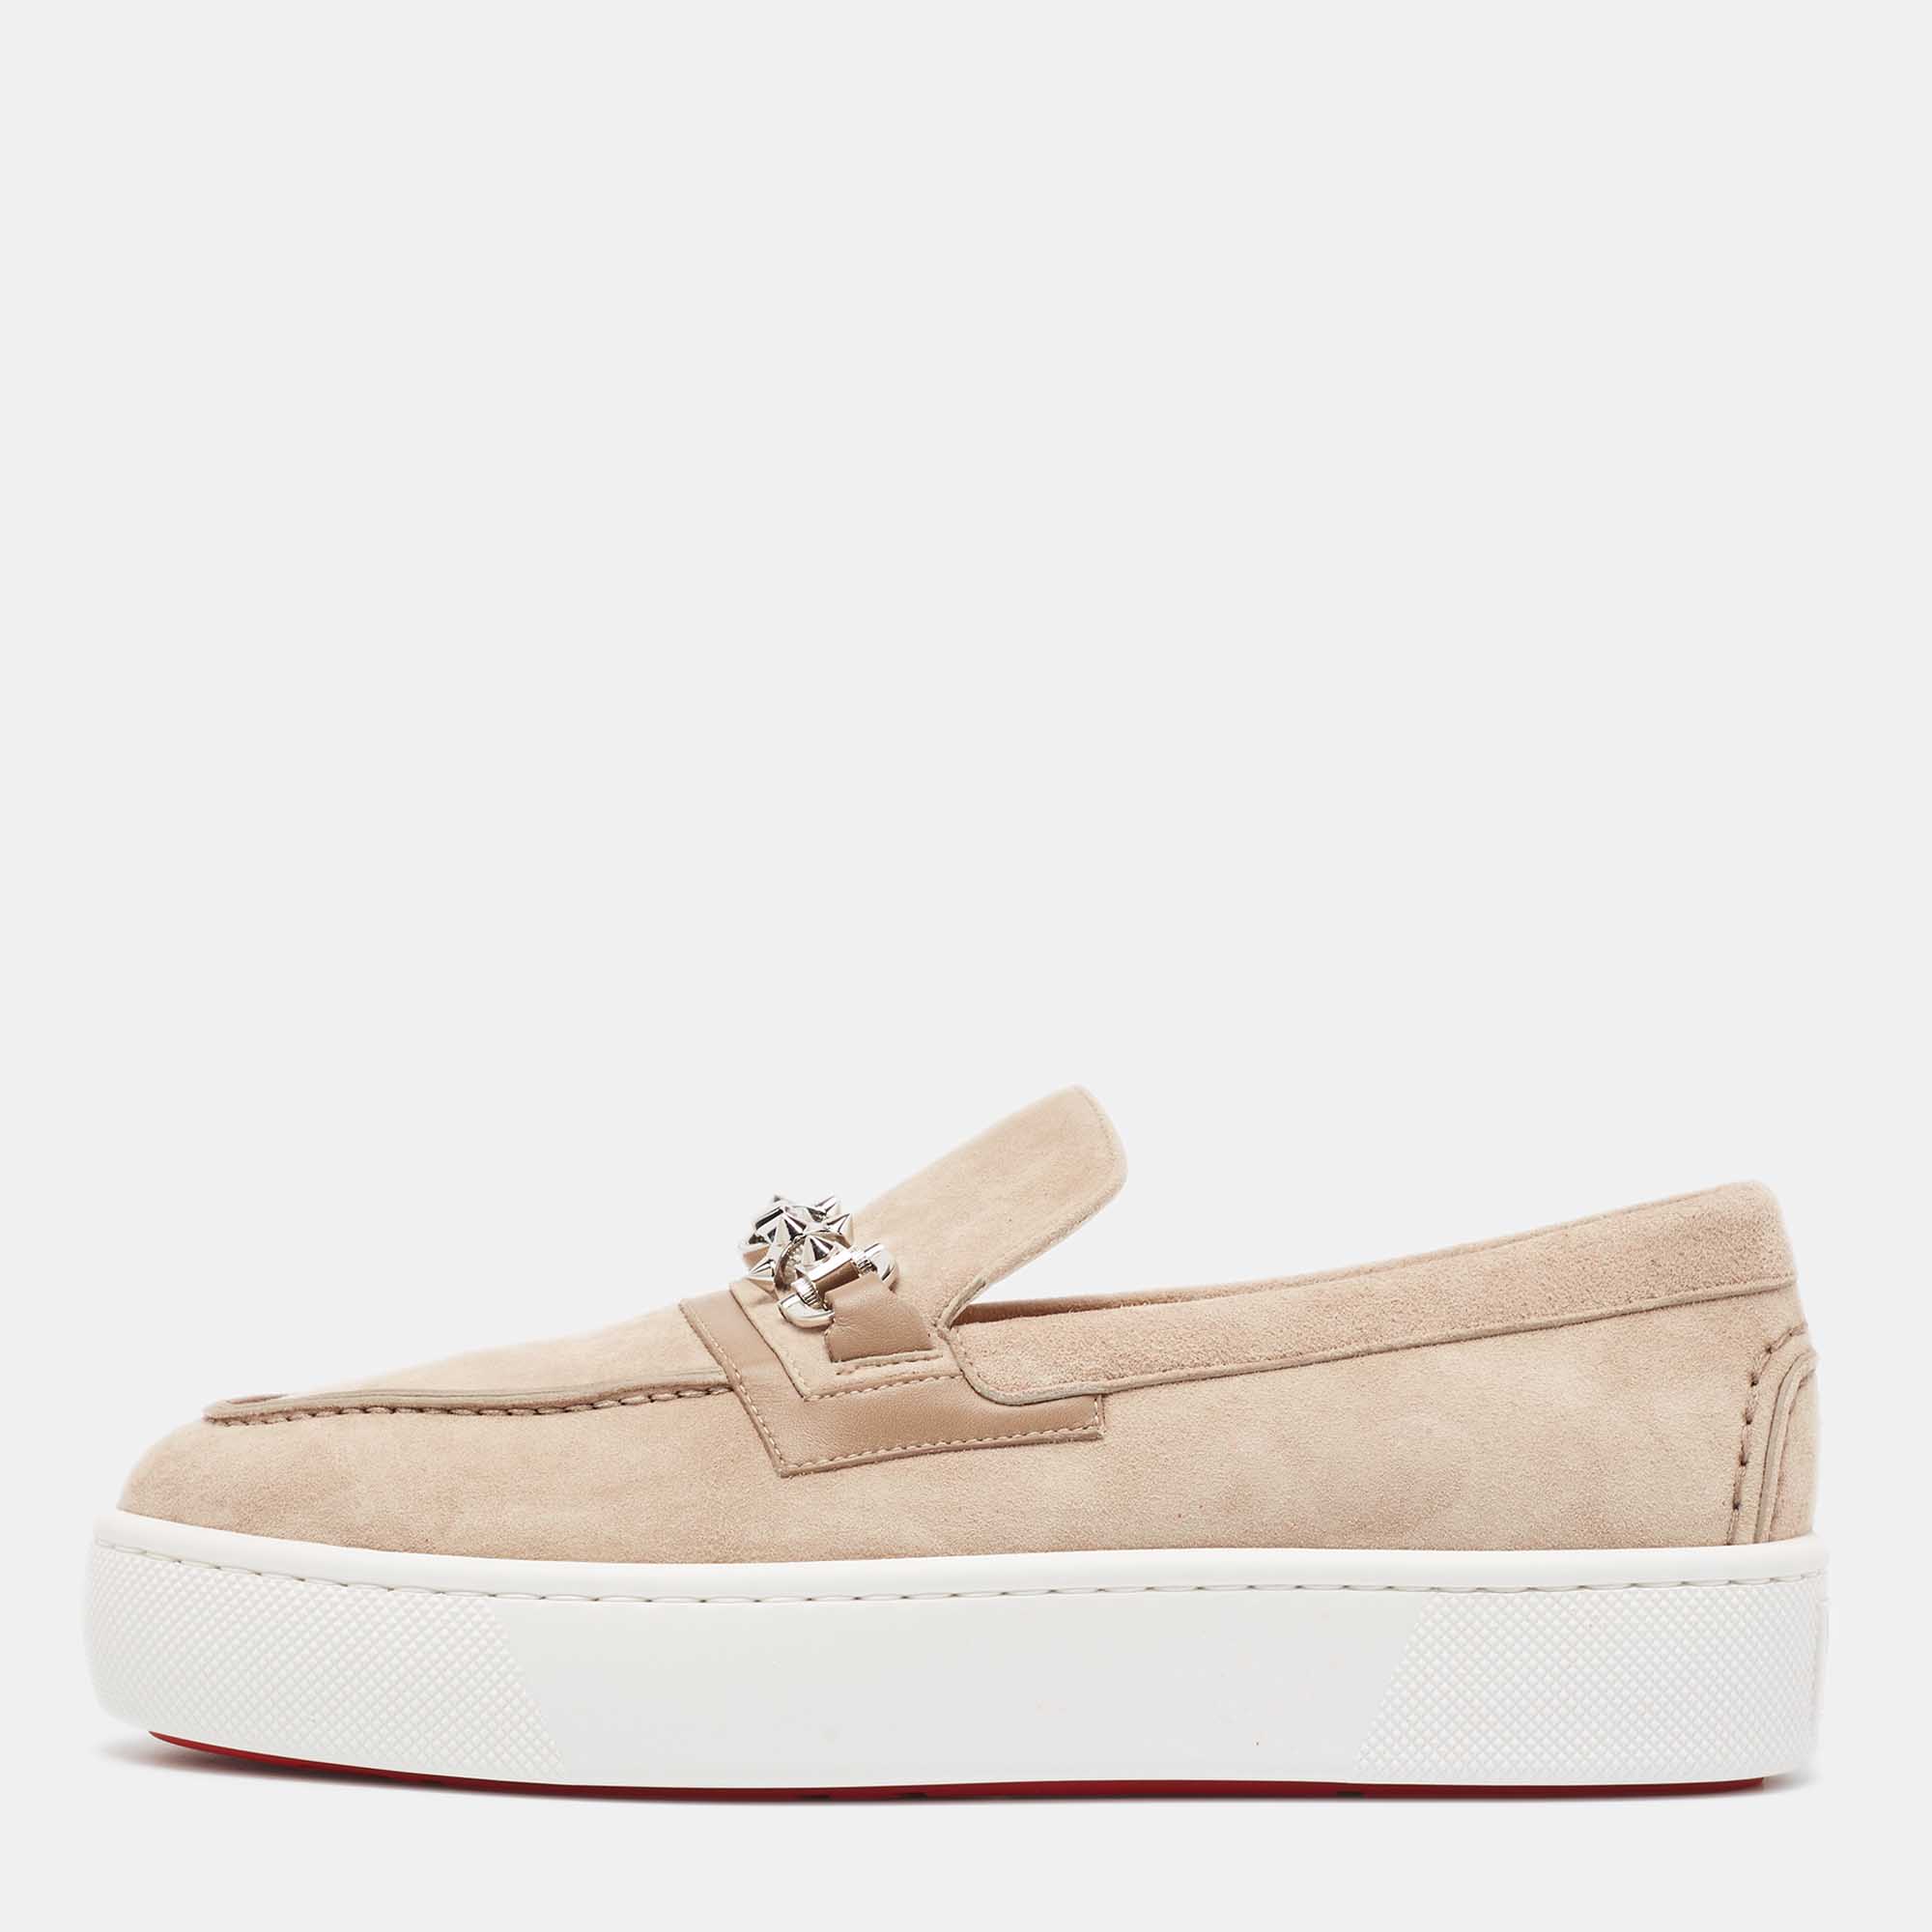 Christian louboutin beige suede and leather metallur sneakers size 39